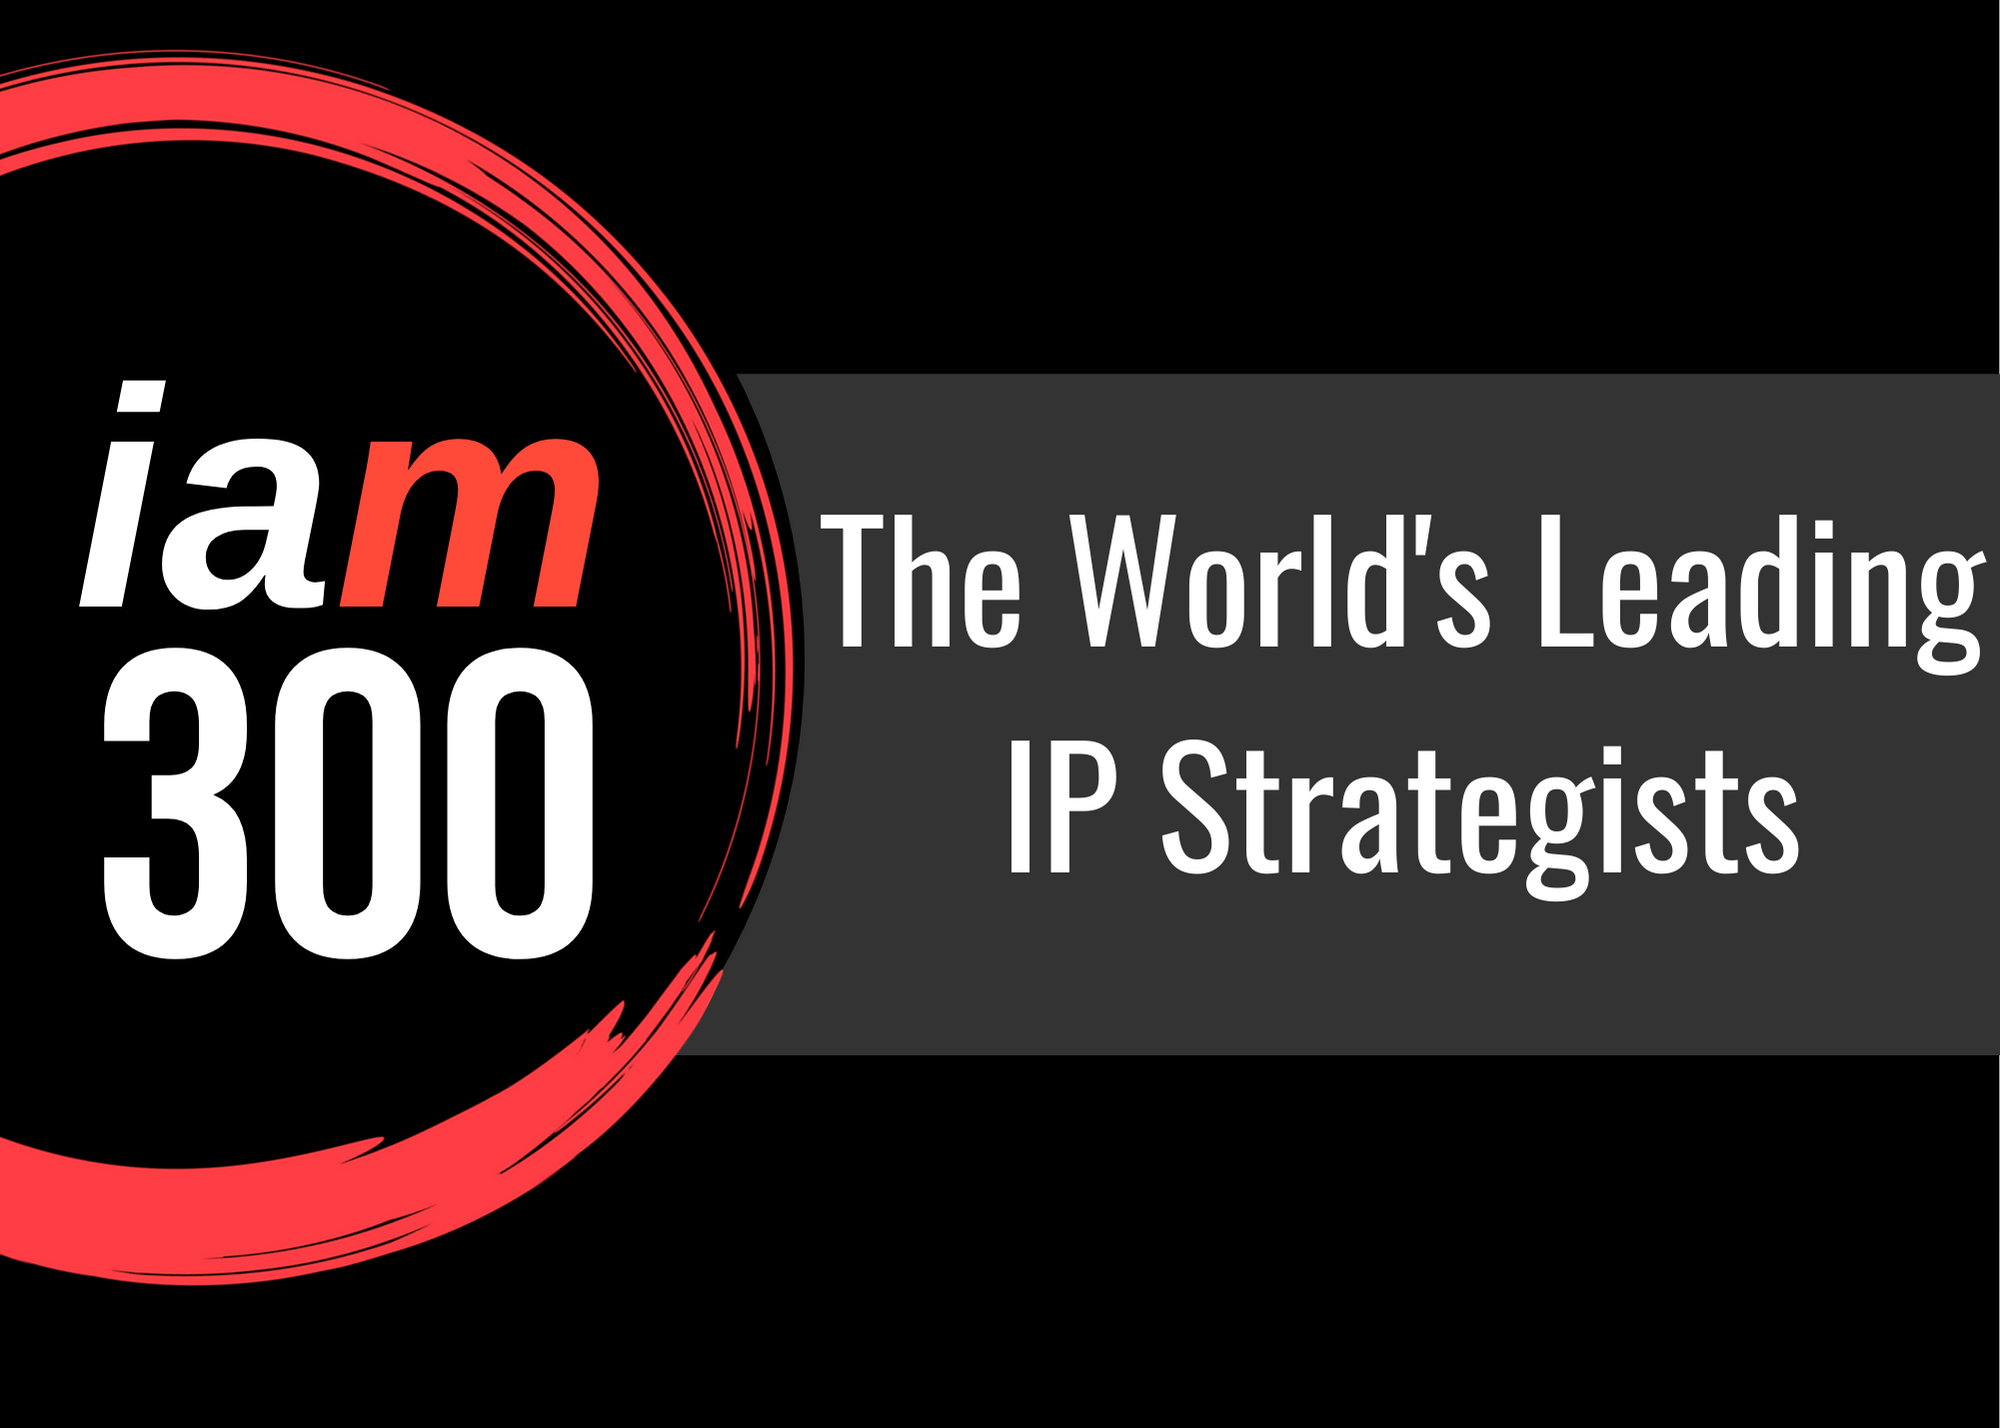 John Russell Once Again Recognized in IAM Strategy – The World’s Leading IP Strategists